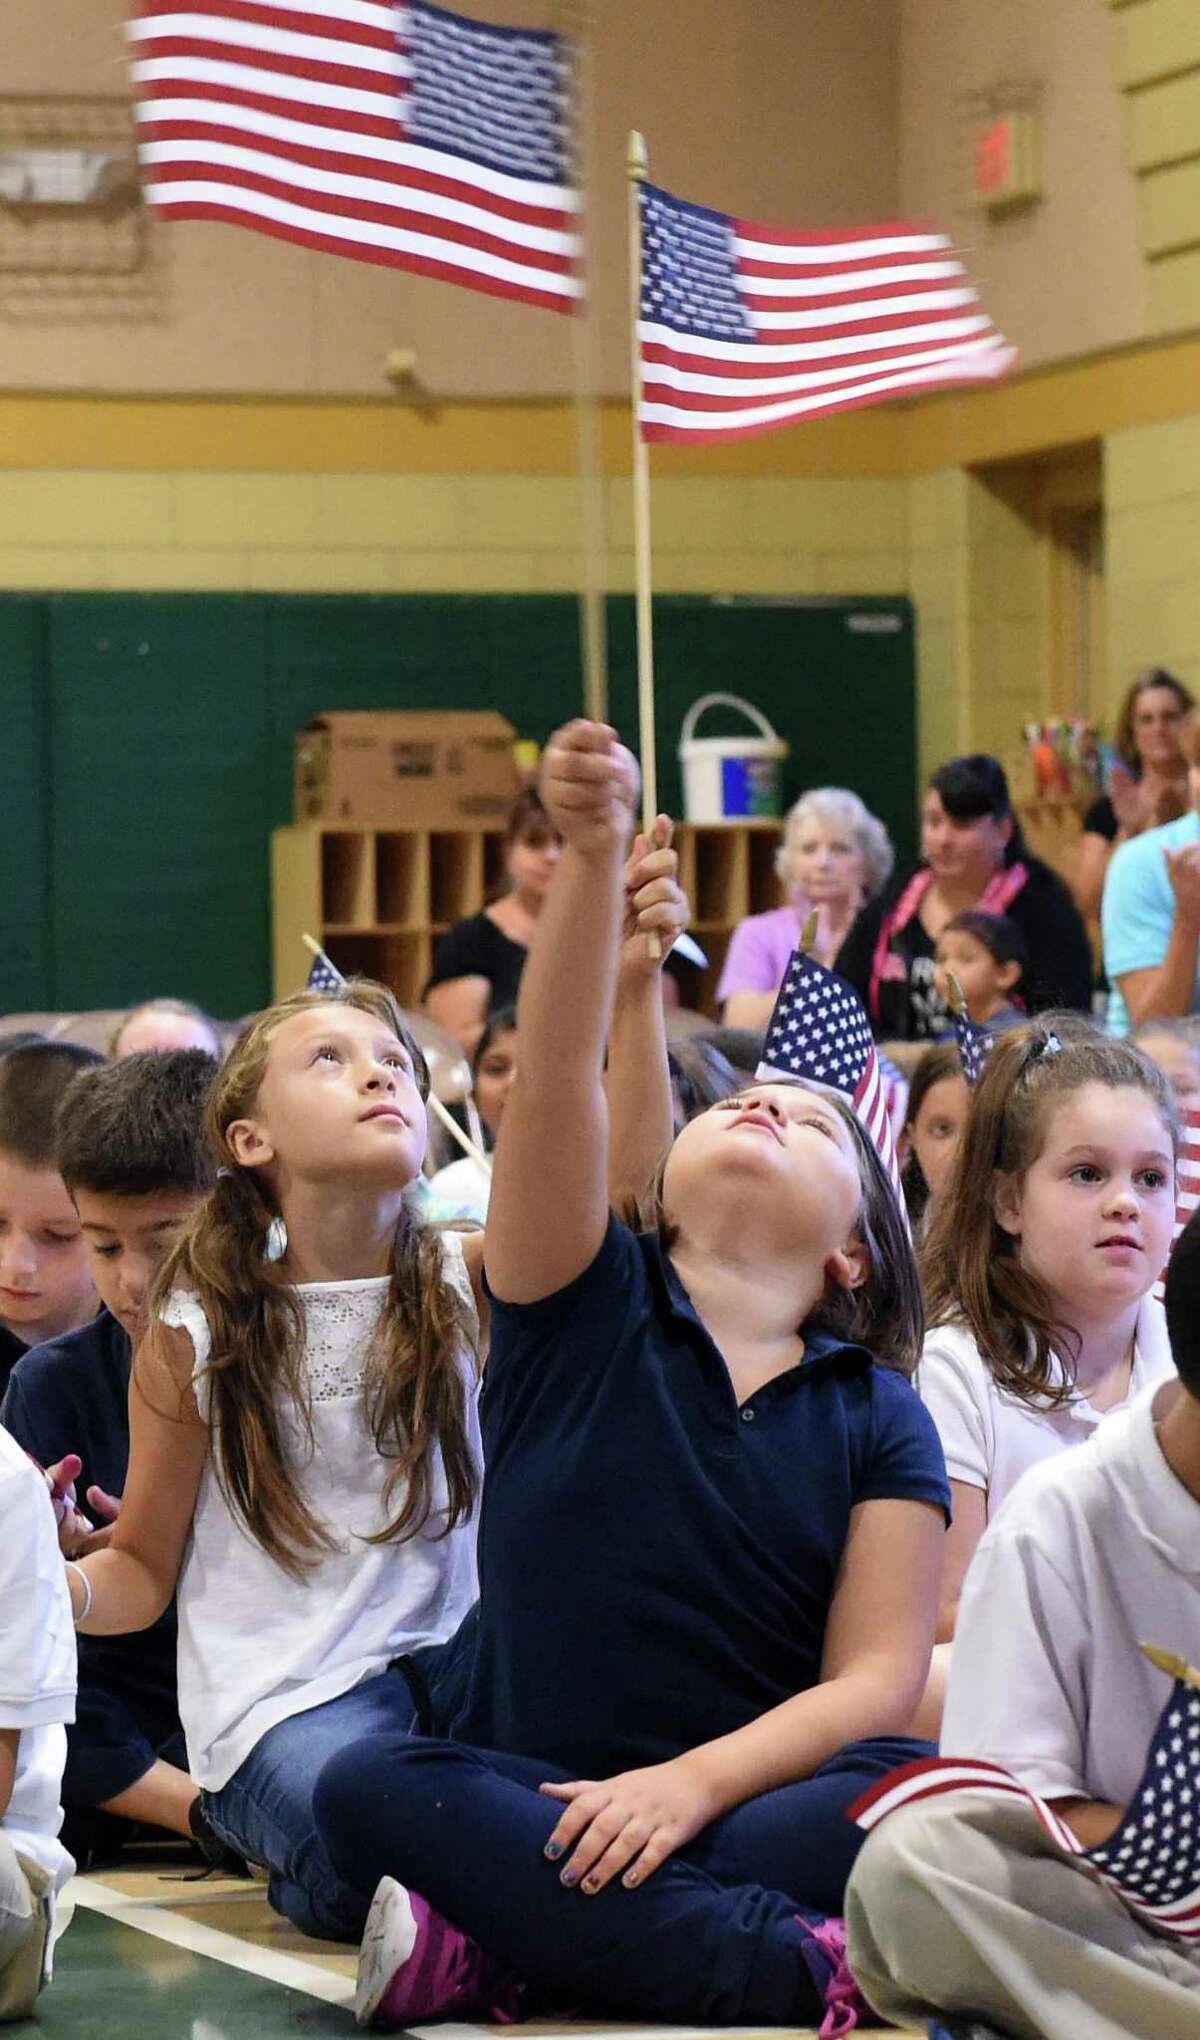 (Peter Hvizdak - New Haven Register) Two elementary school students raise the U.S. flag high during a during a We Love America Day school assembly honoring the memory of the heroes of the 9/11 in the gym at the Grove J. Tuttle Elementary School in East Haven, Connecticut Friday, September 11, 2015 marking the anniversary of the 9/11 attacks on the United States in 2001.